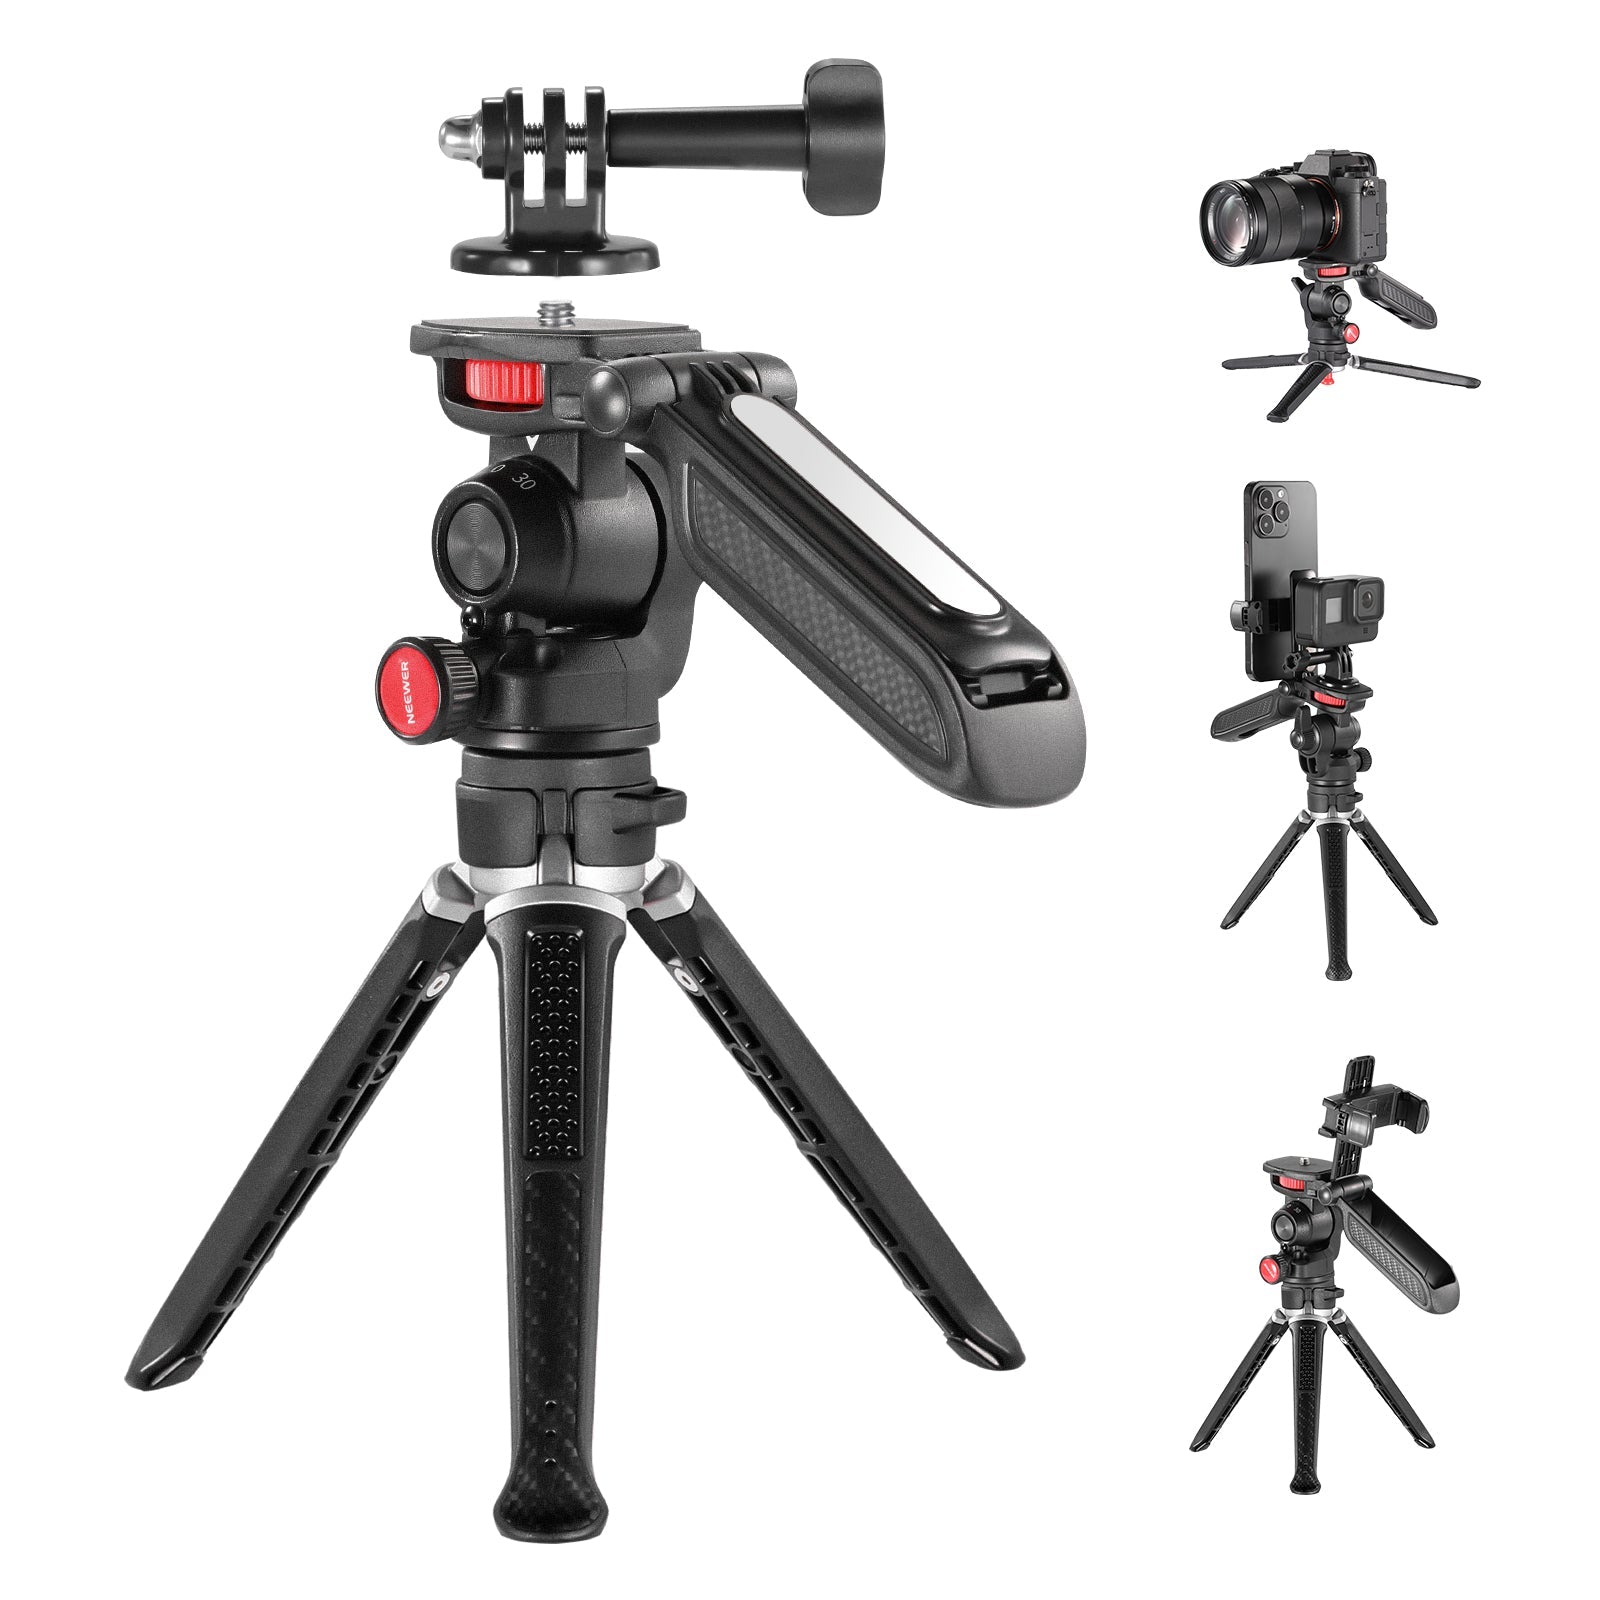 NEEWER TS003 Mini Tripod for Camera and Phone with Handle